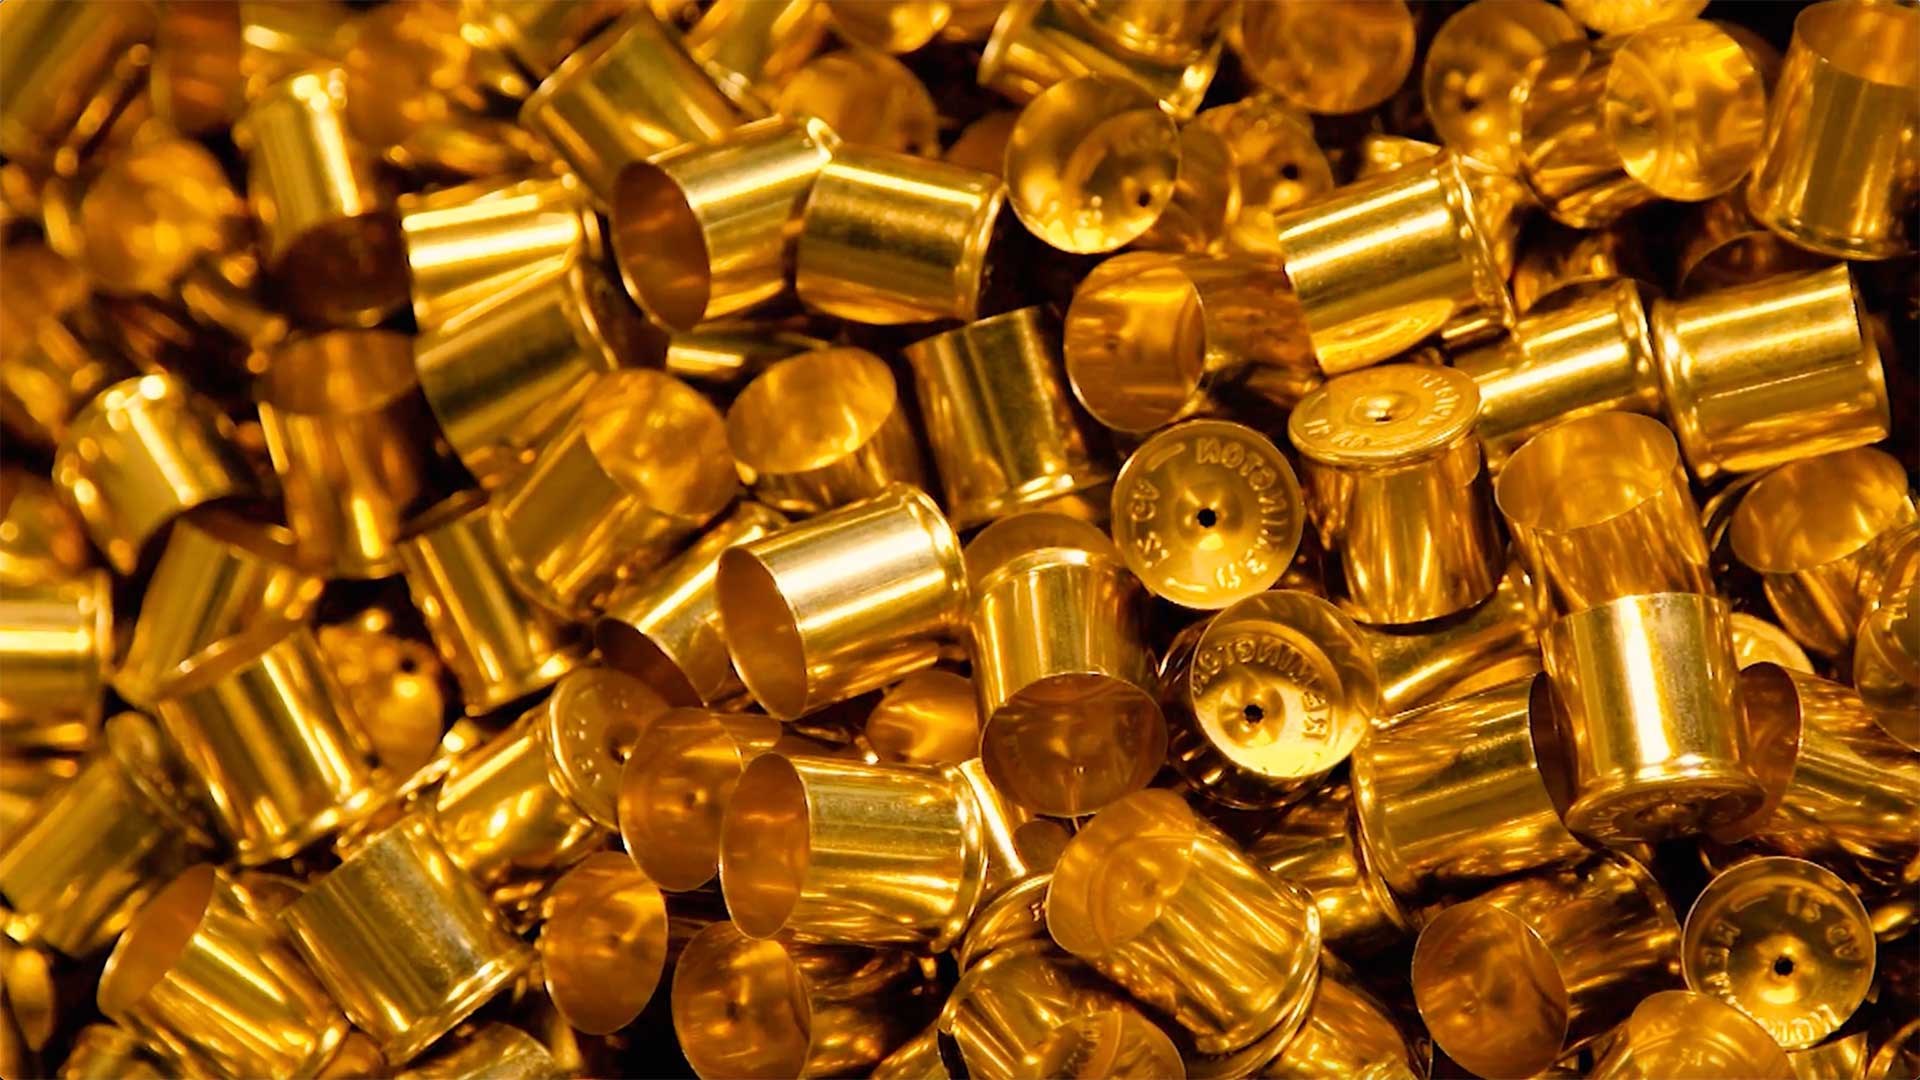 Freshly produced brass shotshell caps waiting to be assembled.